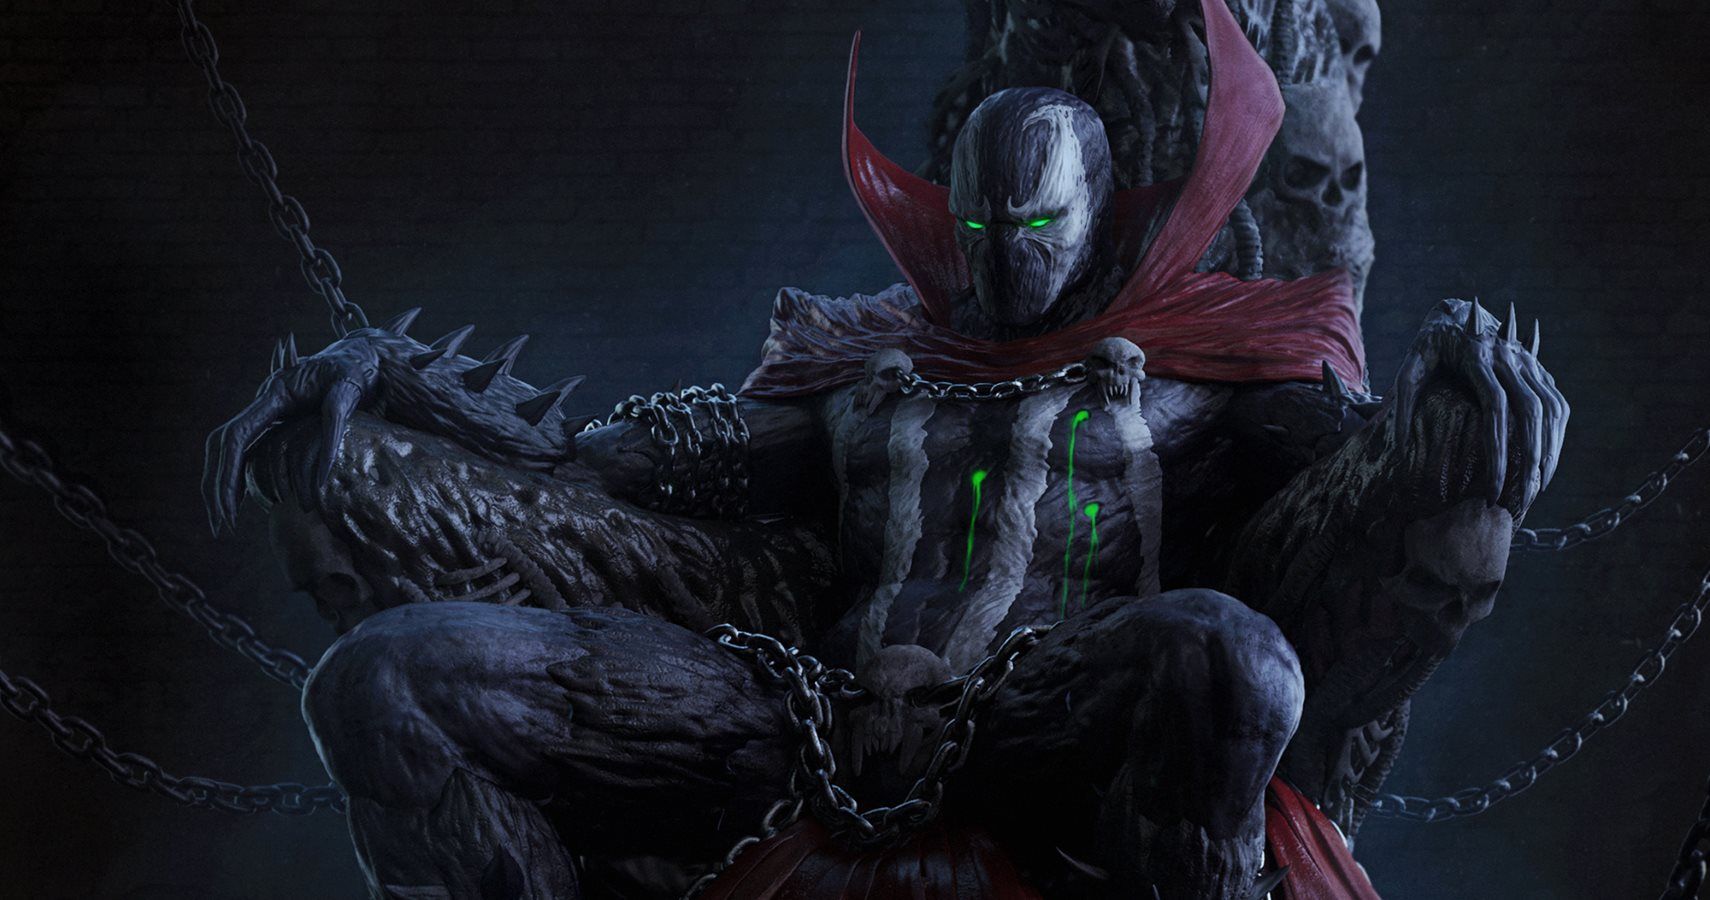 Todd McFarlane Is Like Two Weeks Late On The Spawn MK11 DLC News